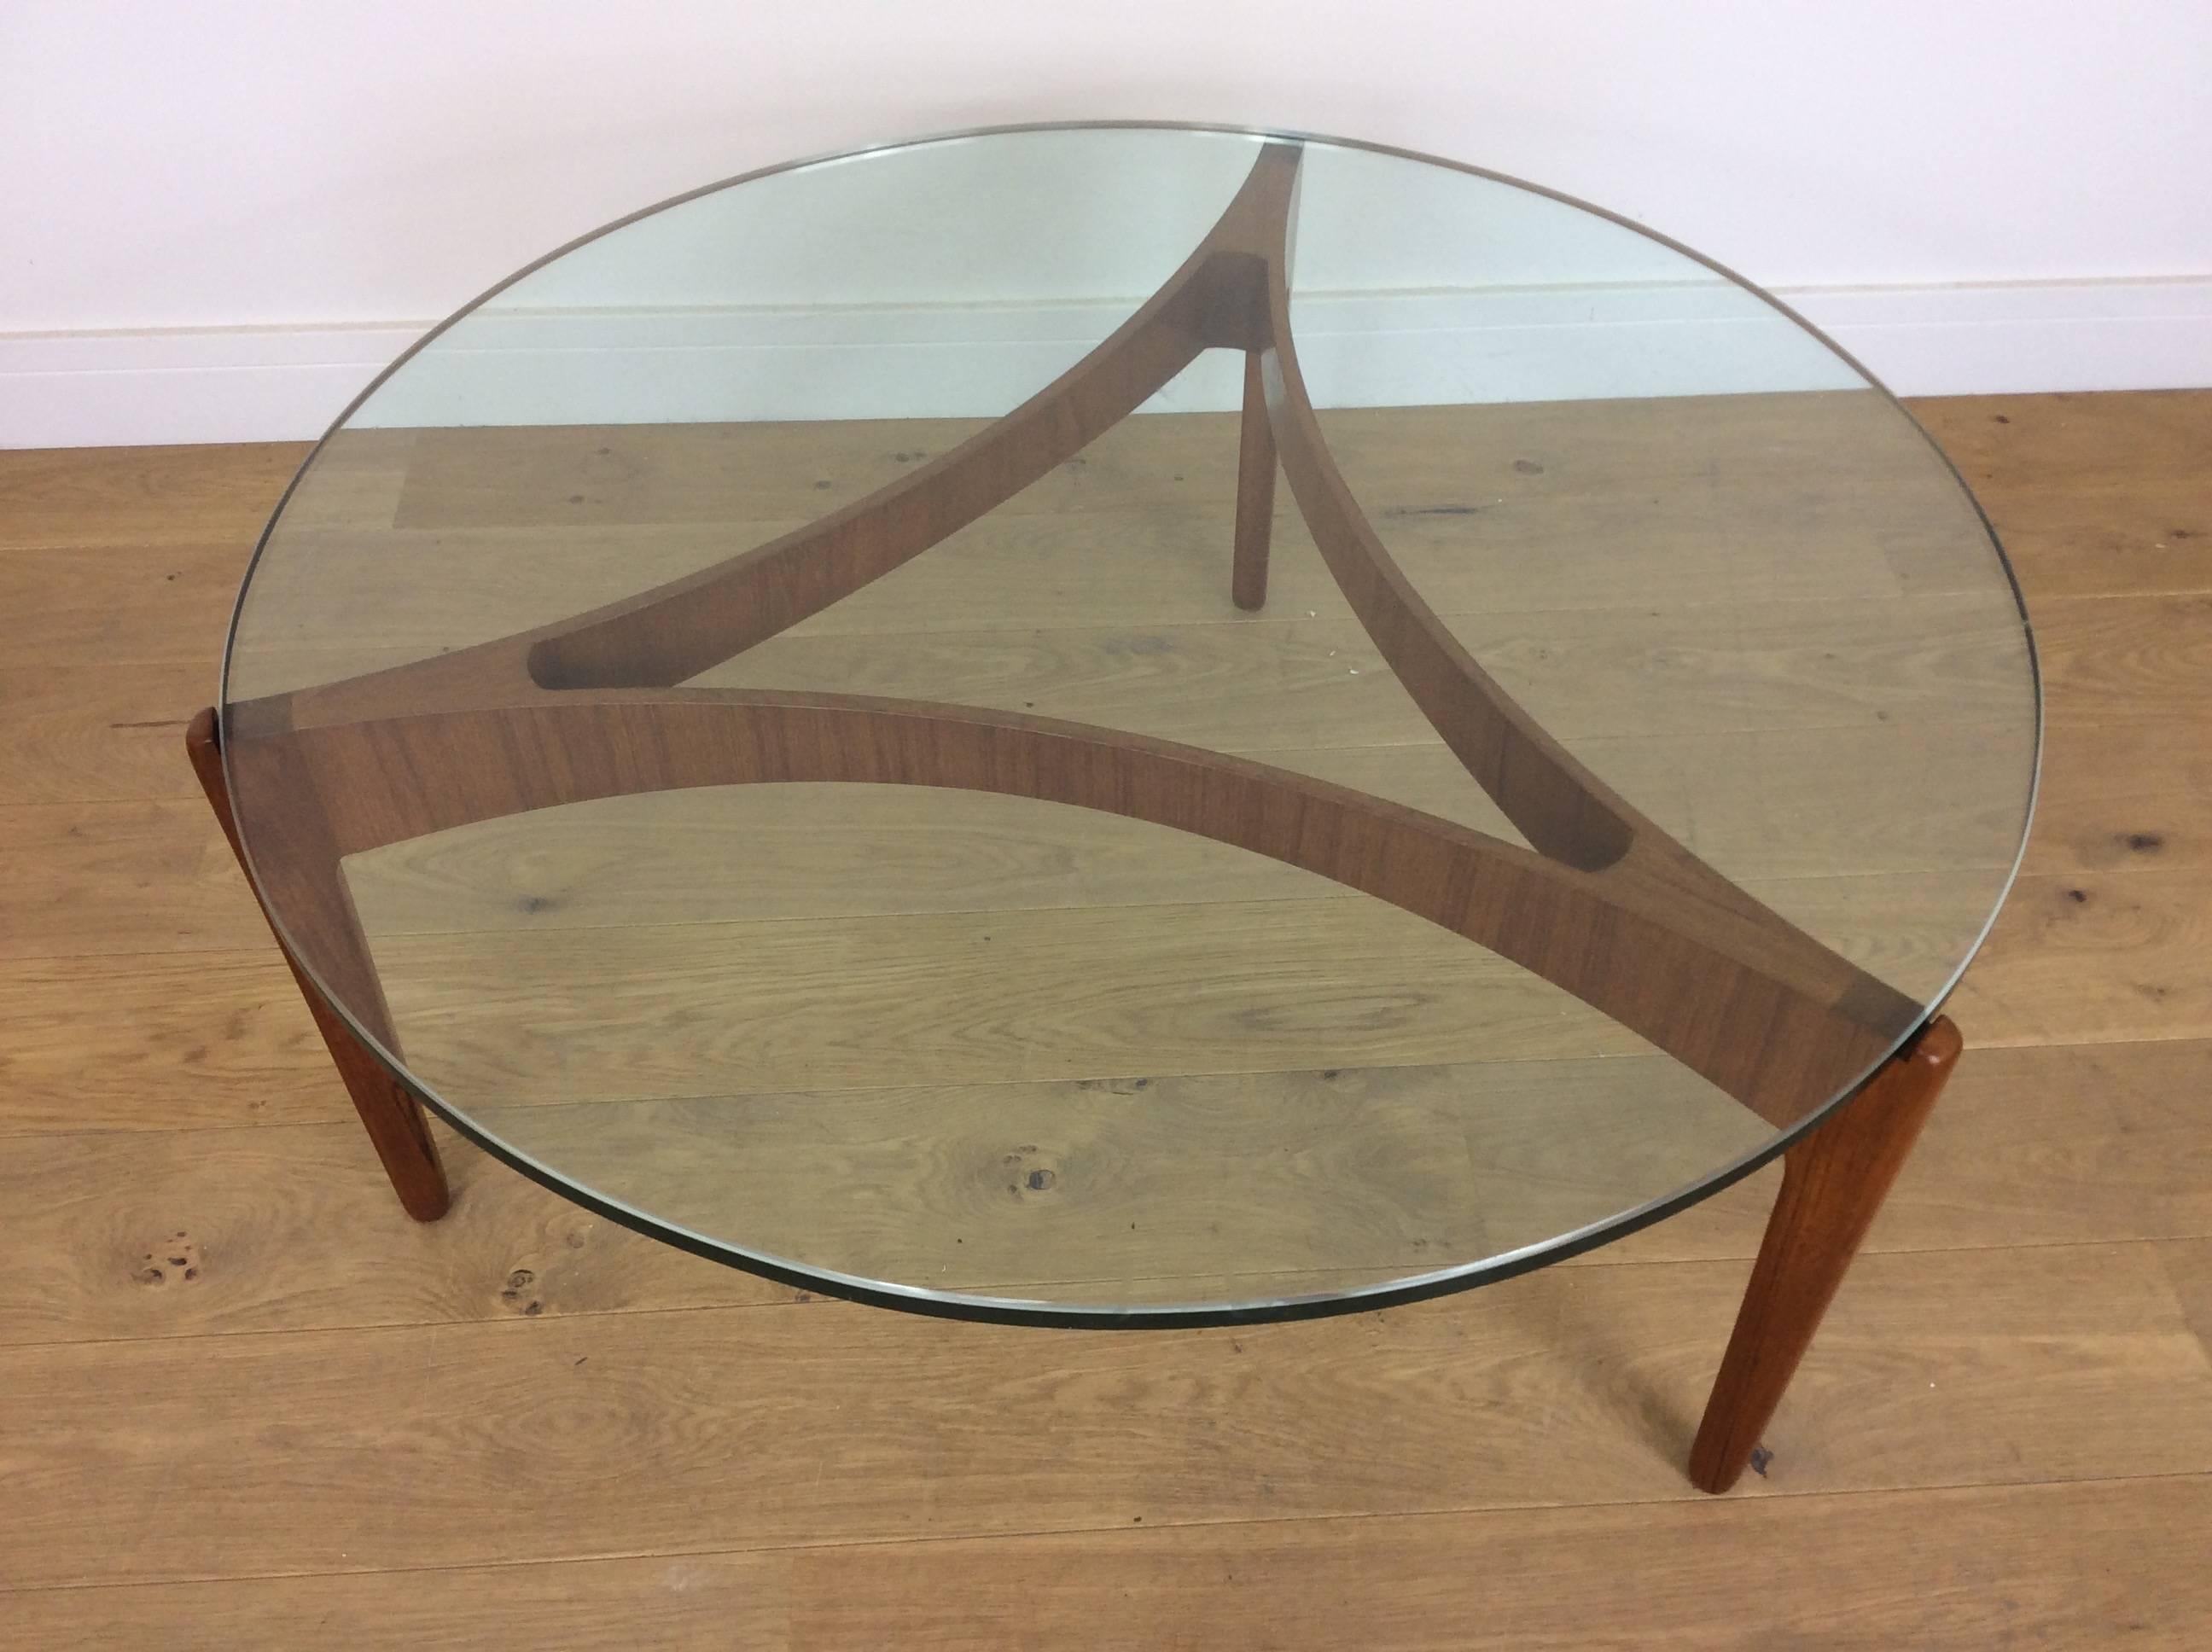 Mid-Century Modern design at its best.
Beautiful teak coffee table designed by Sven Ellekaer, 1961, produced by Christian Linneberg.
This design was used on the James Bond Movie 